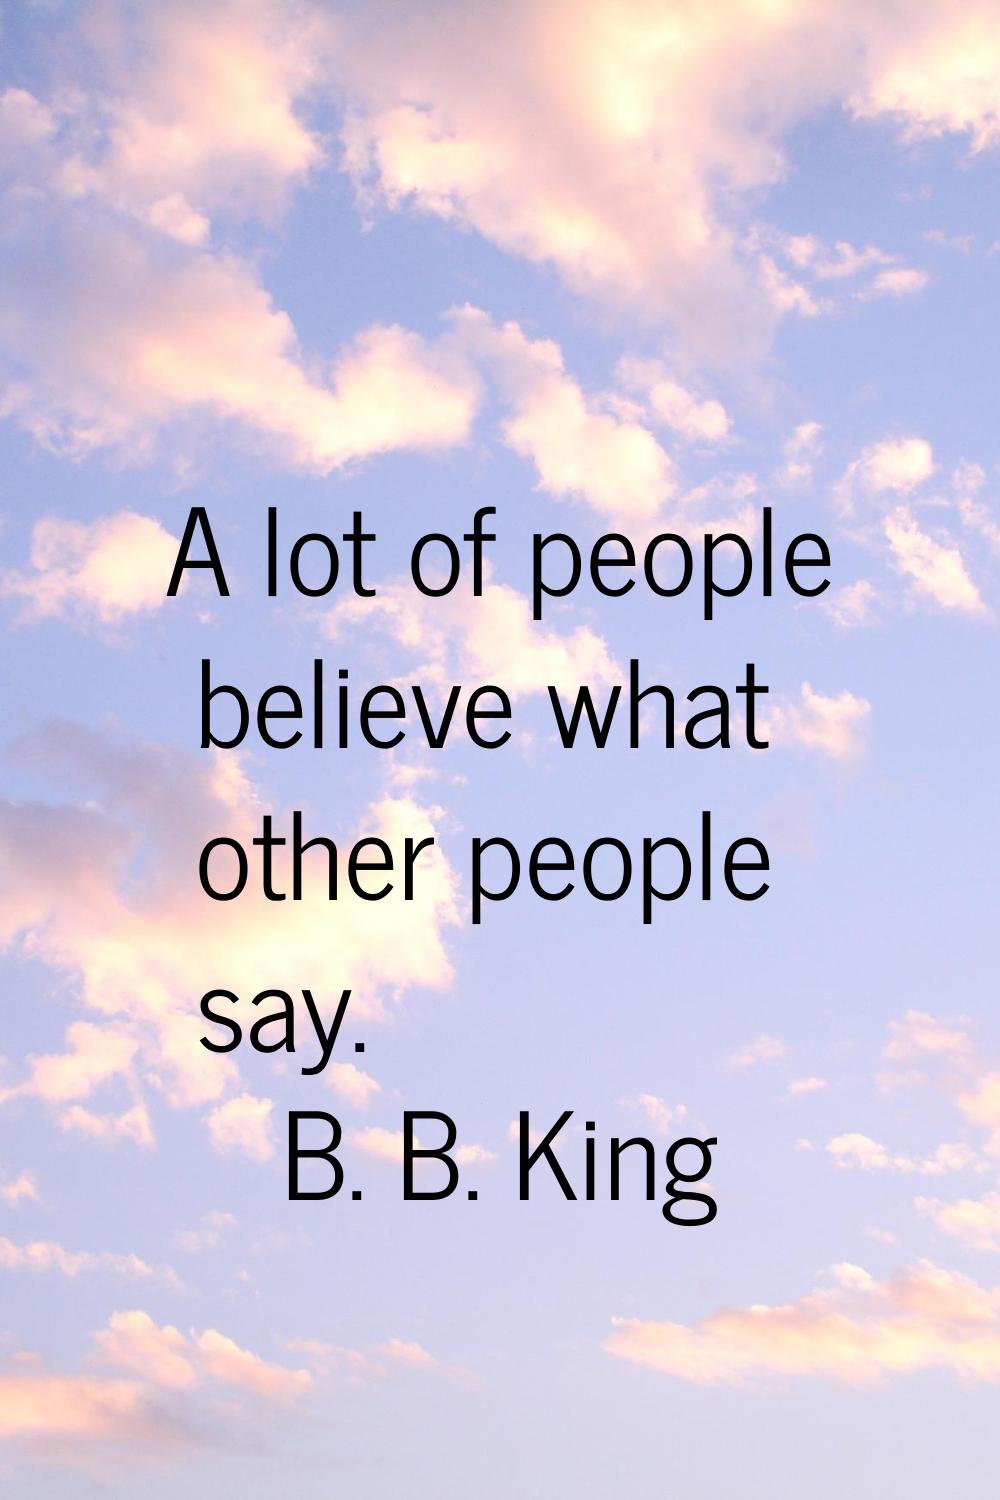 A lot of people believe what other people say.